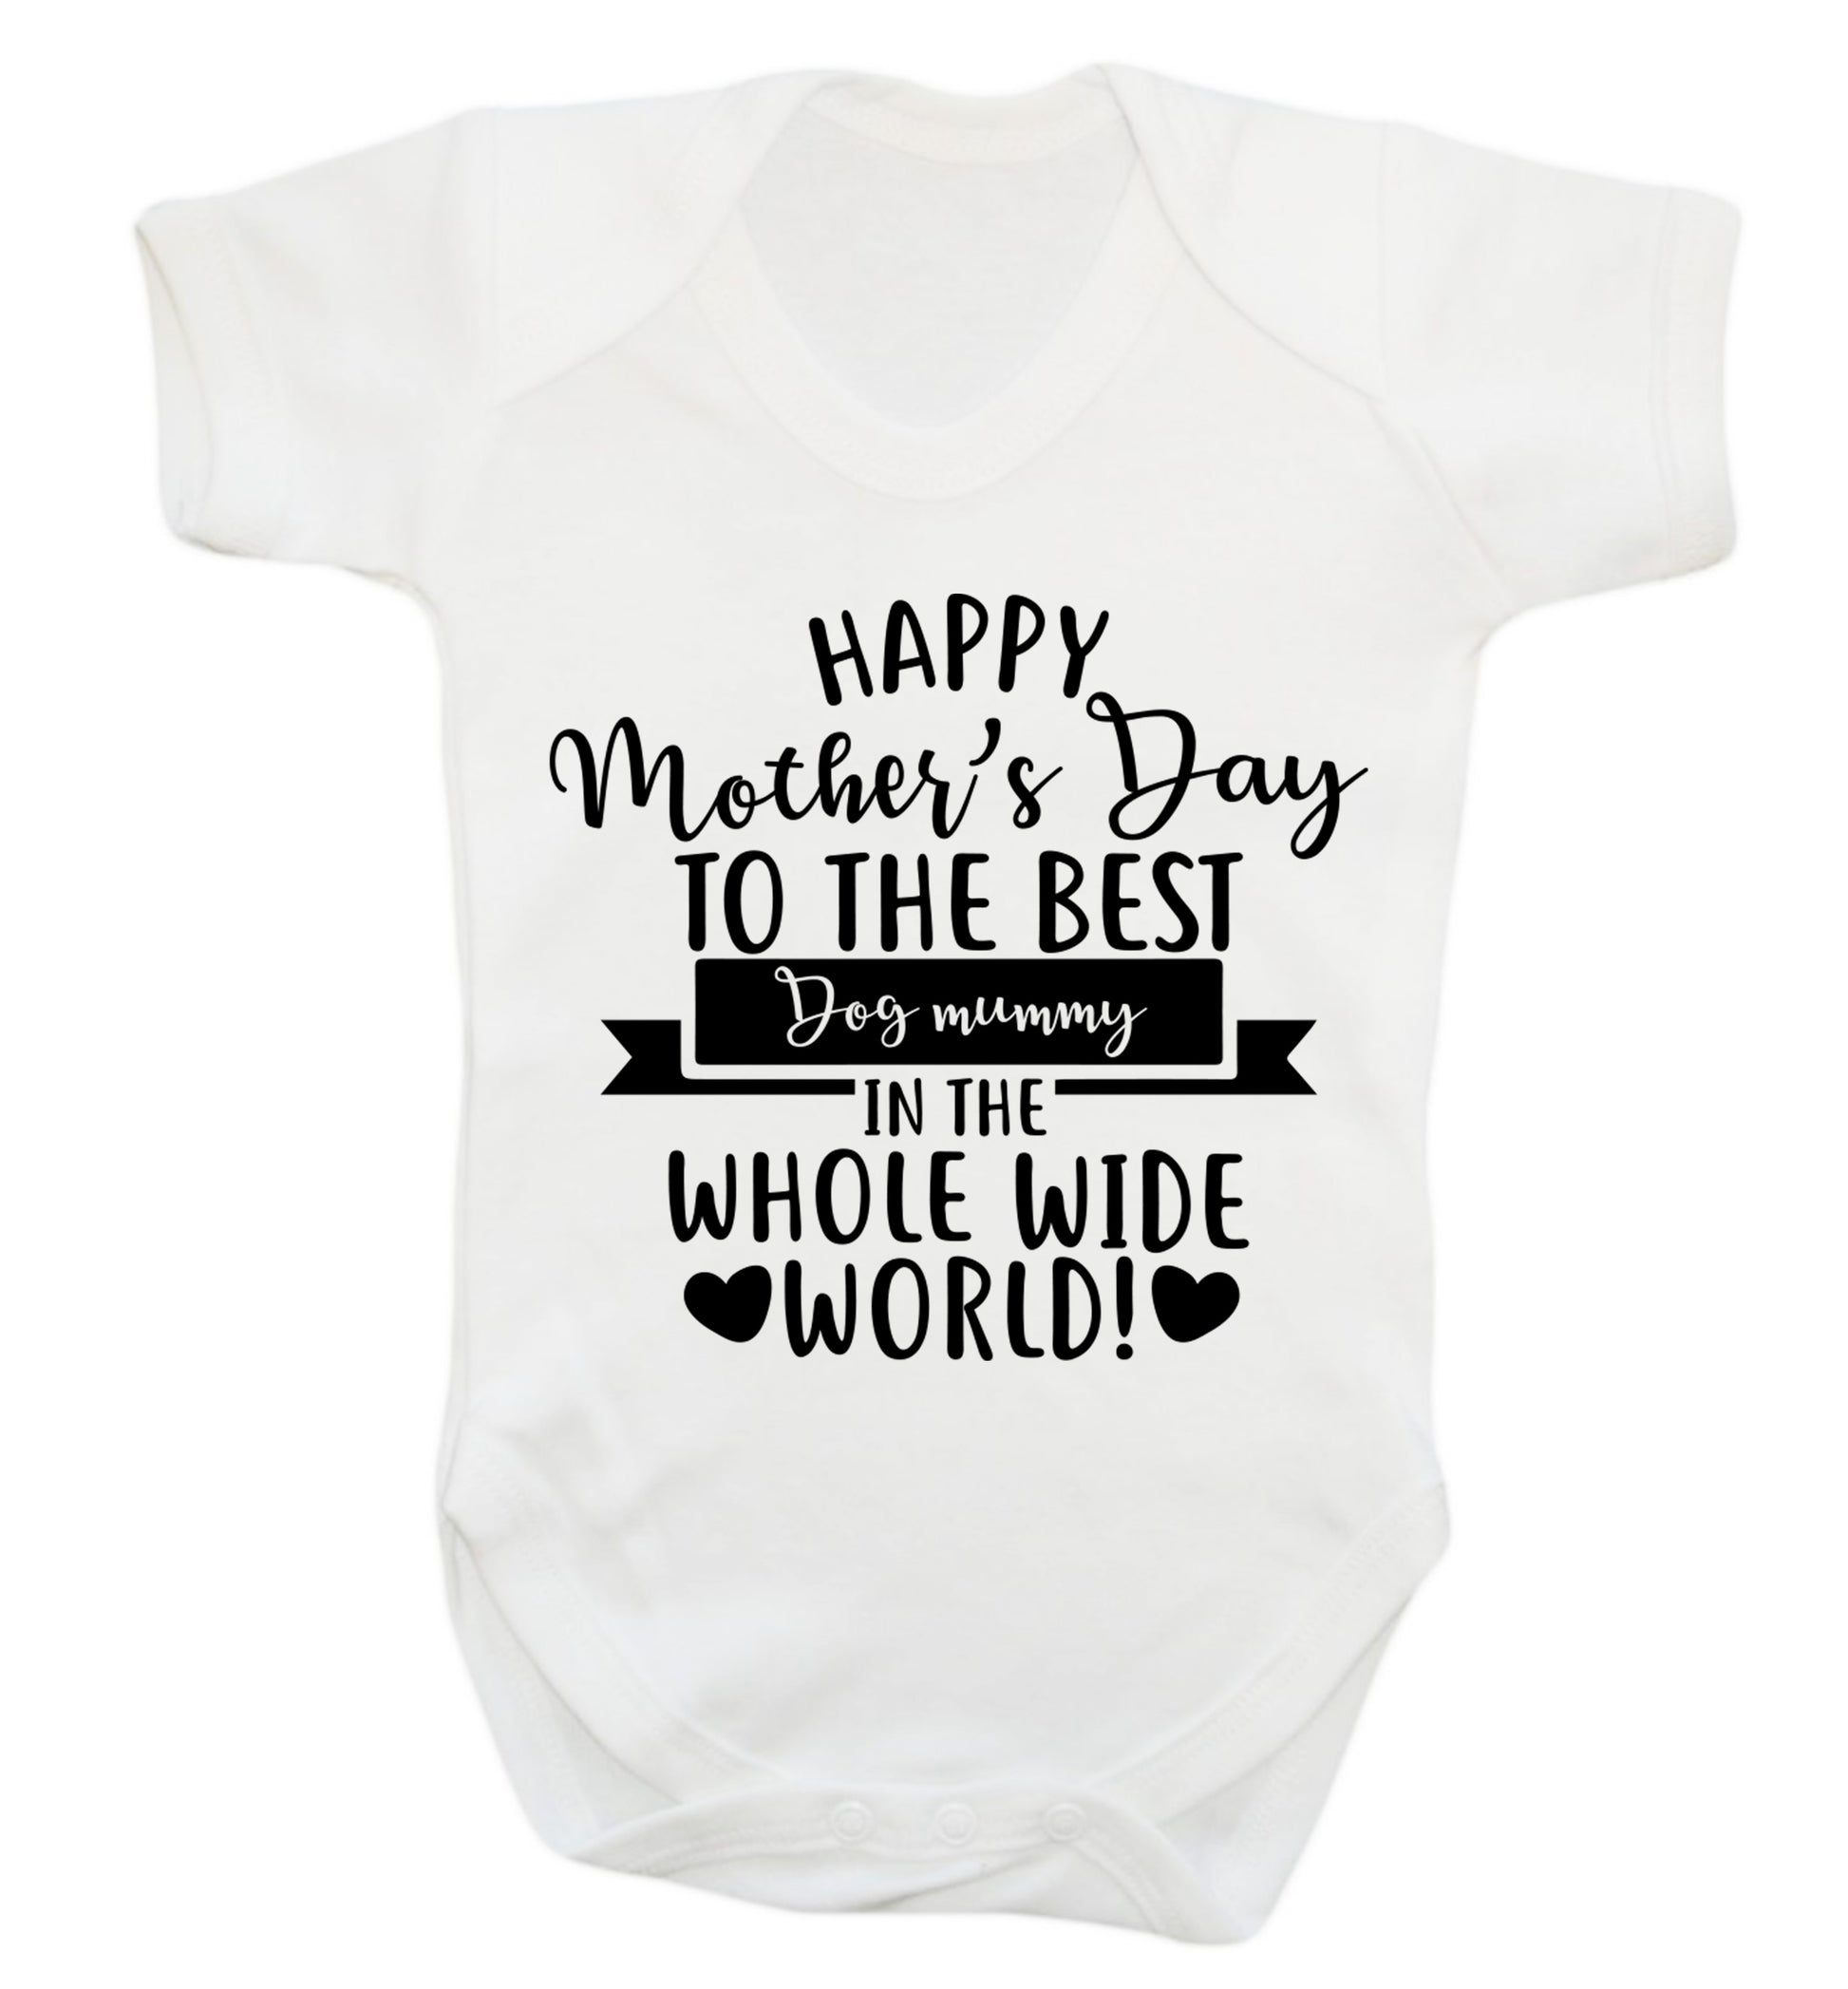 Happy mother's day to the best dog mummy in the world Baby Vest white 18-24 months